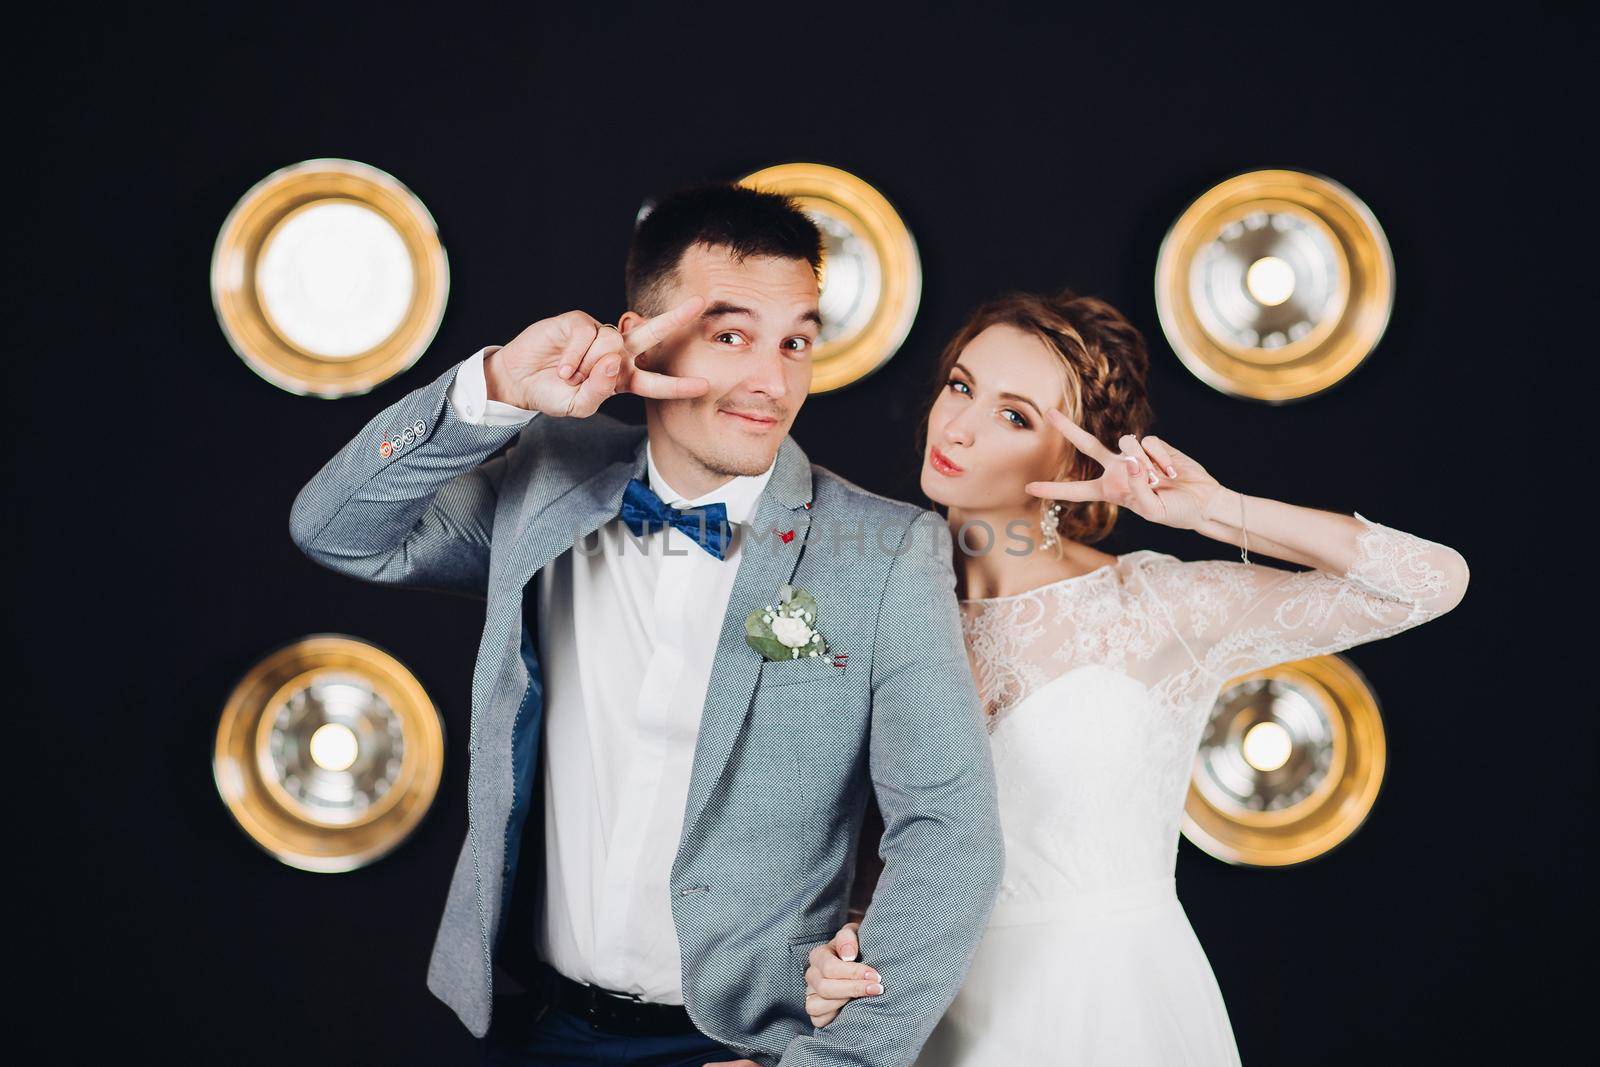 Studio portrait of two funny and positive wedding couple of groom and bride having fun, dancing at party, showing peace by fingers. Beautiful young married couple having fun together.